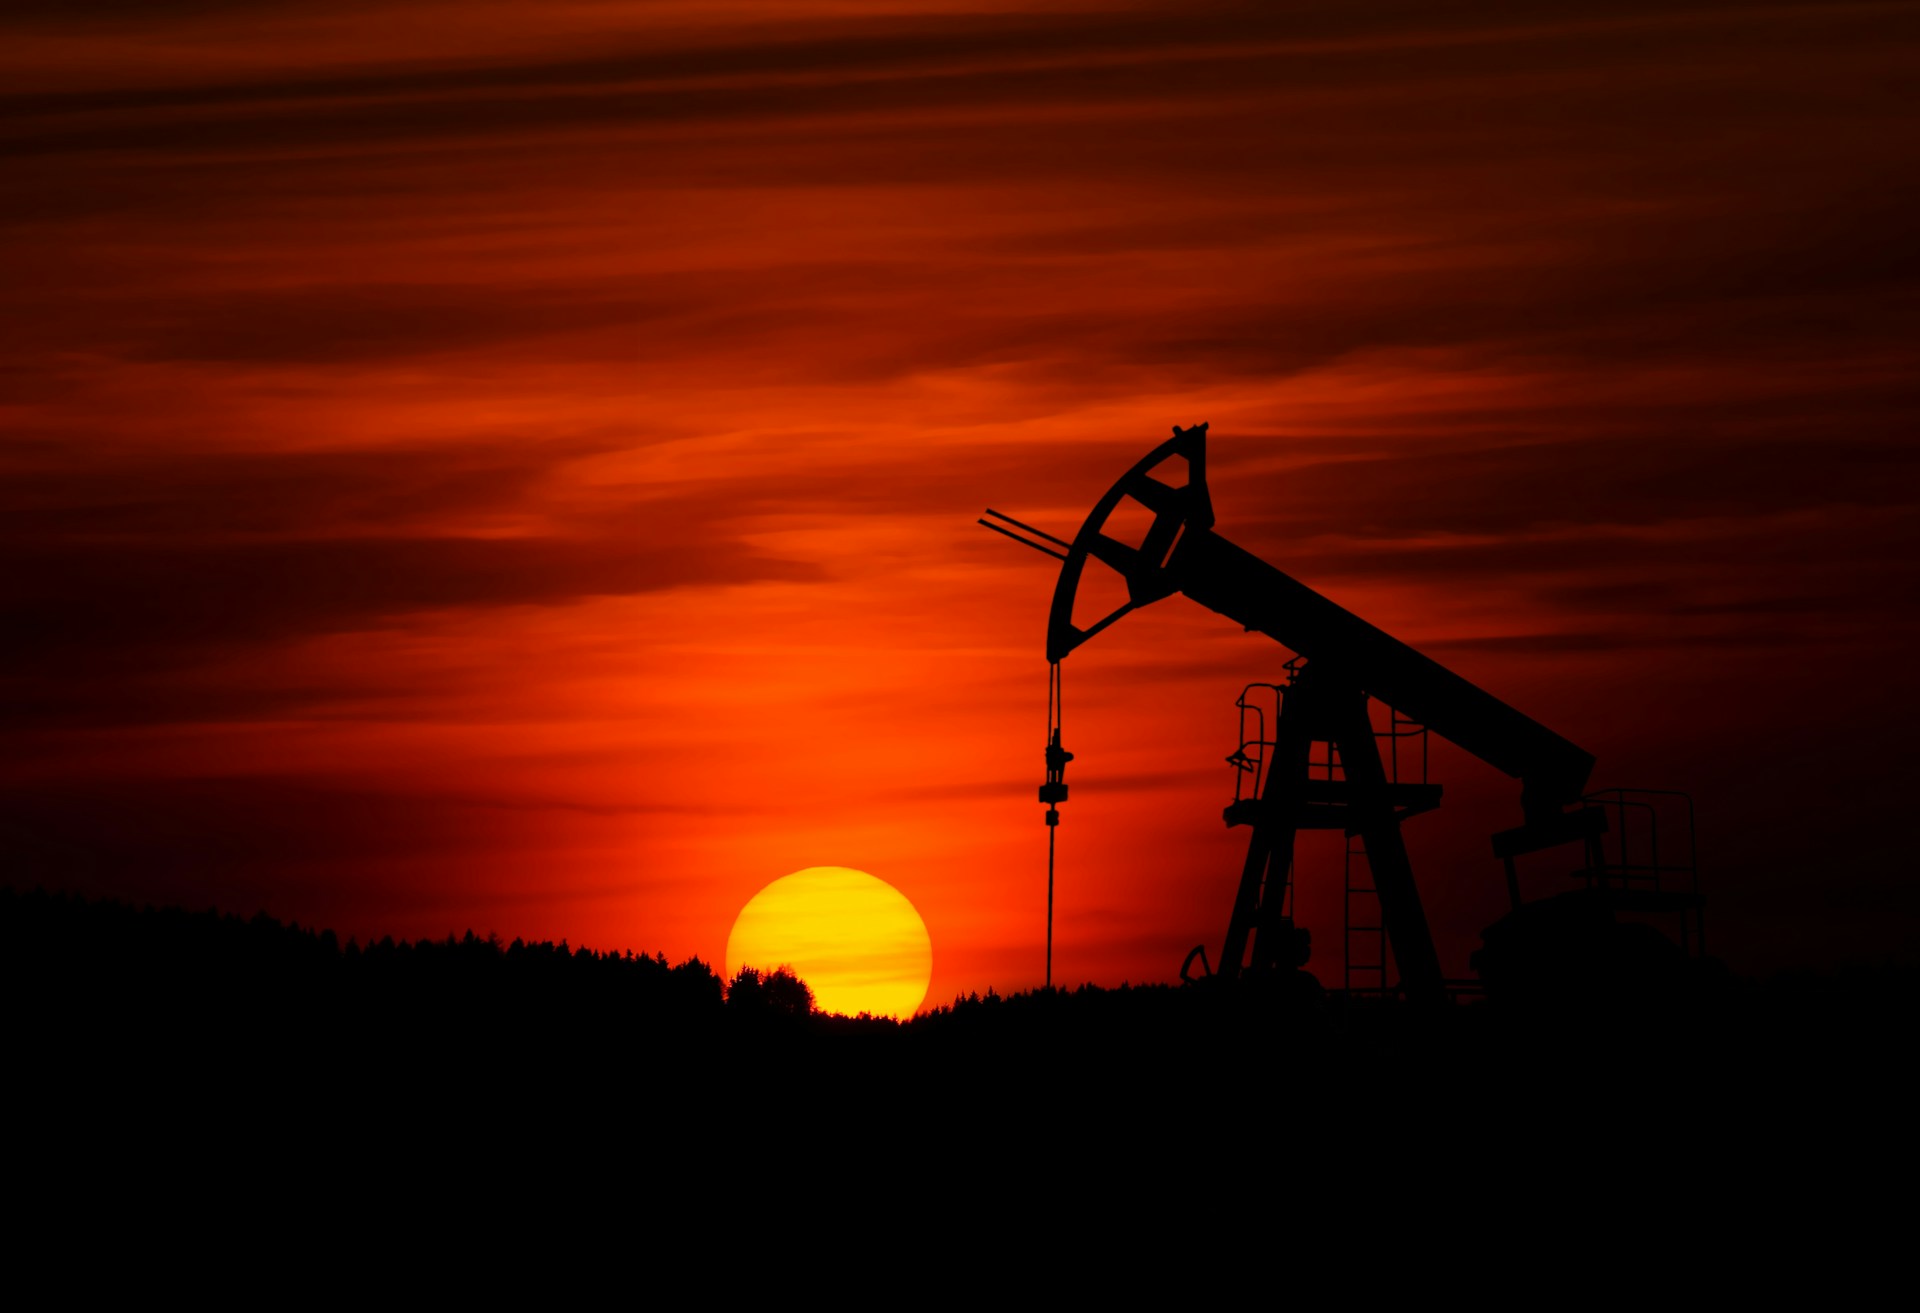 What may an Ethical Investor do with profits from fossil fuels due to the war on Ukraine?